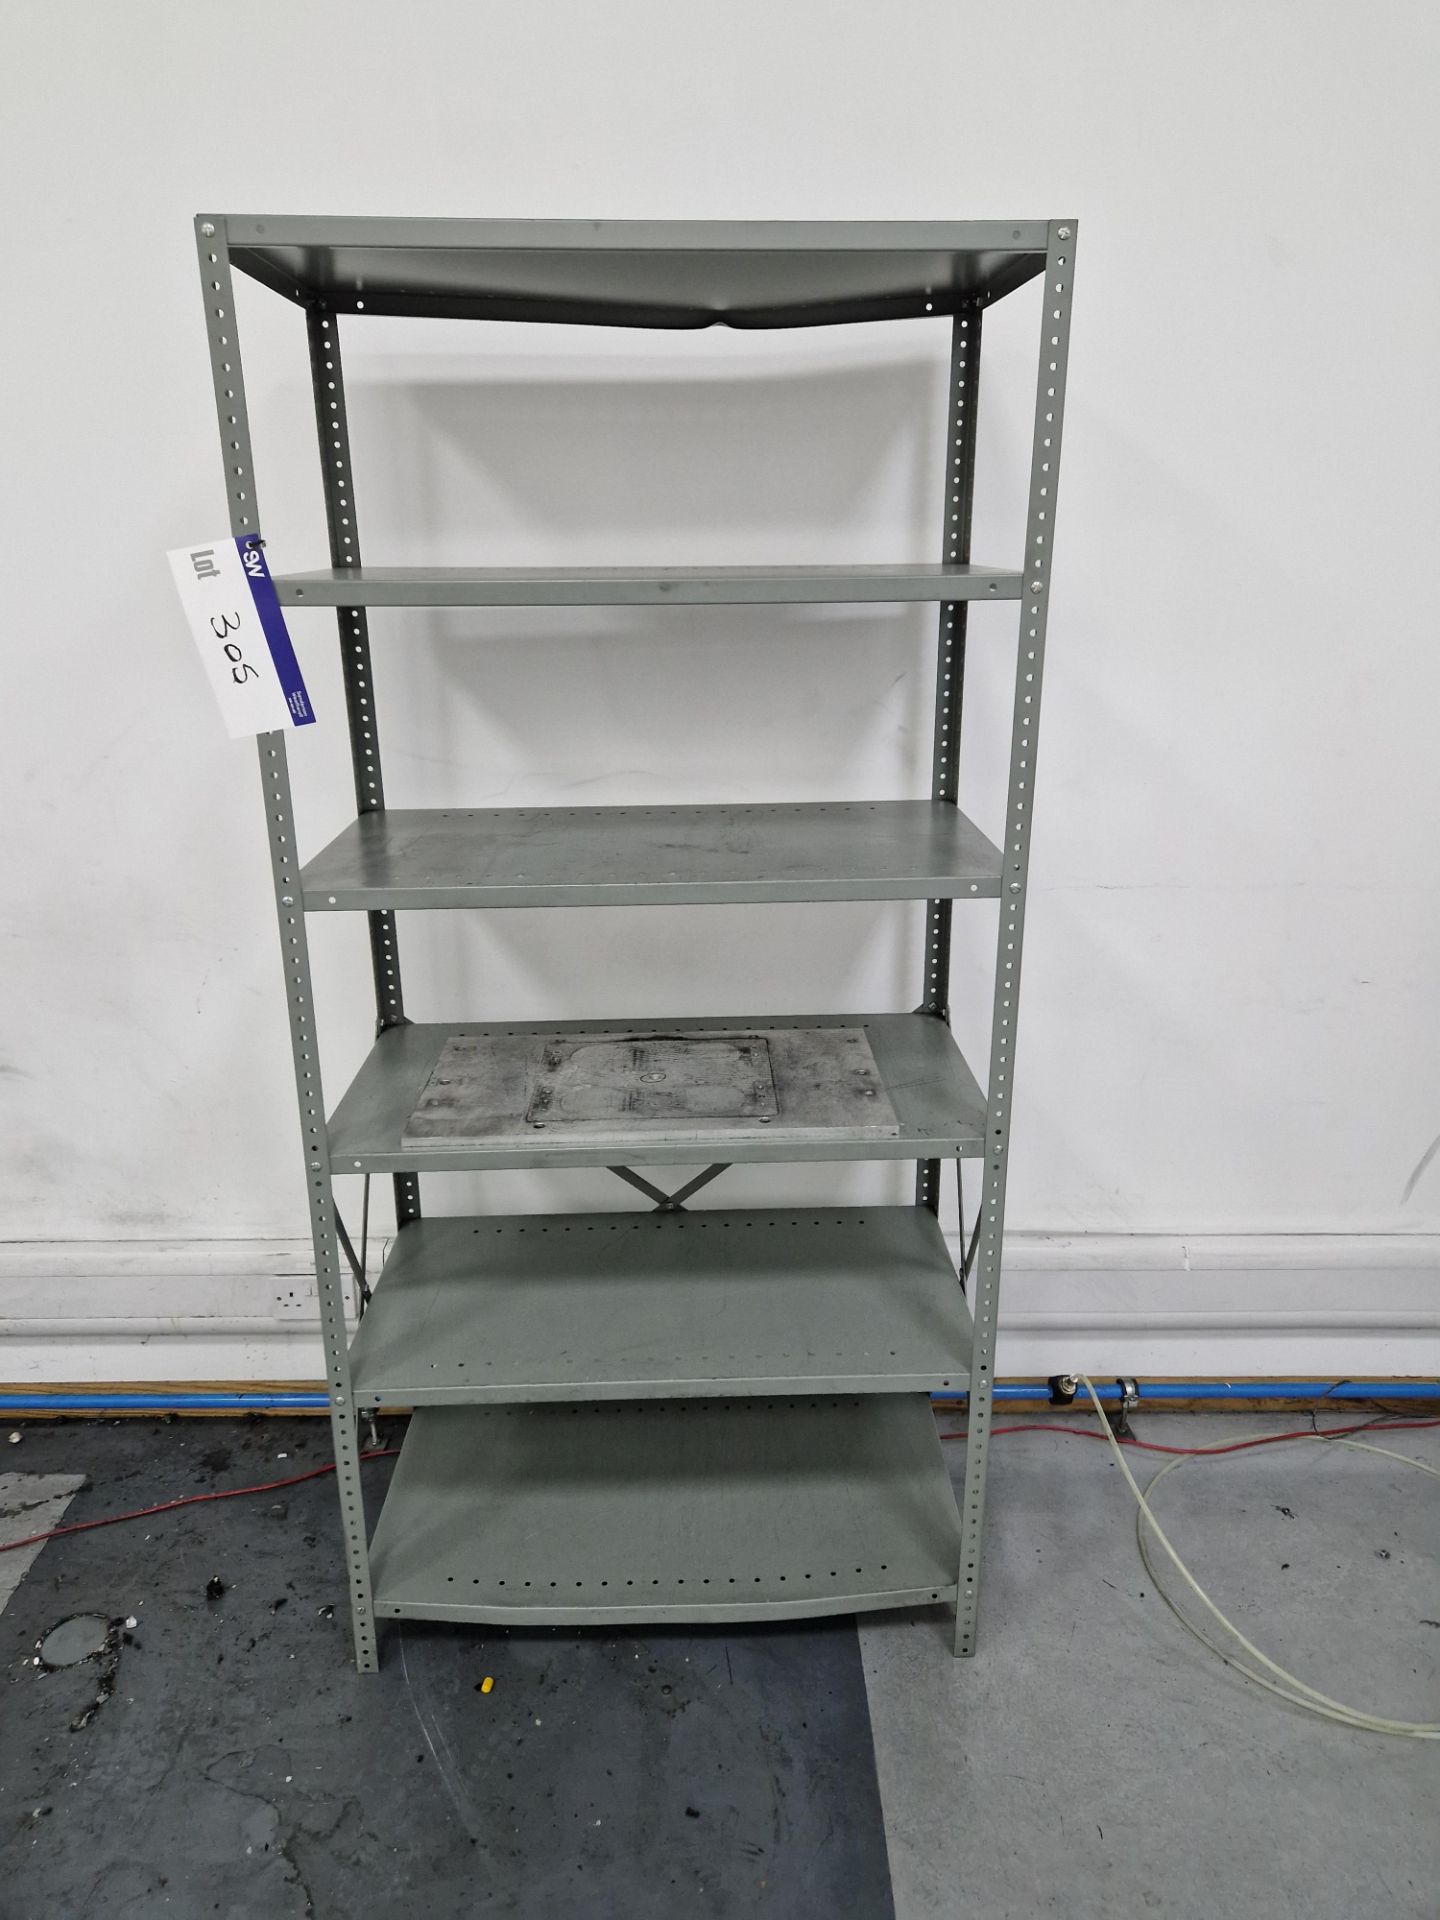 Six Tier Bolted Shelving Unit & Double Door CabinetPlease read the following important notes:-